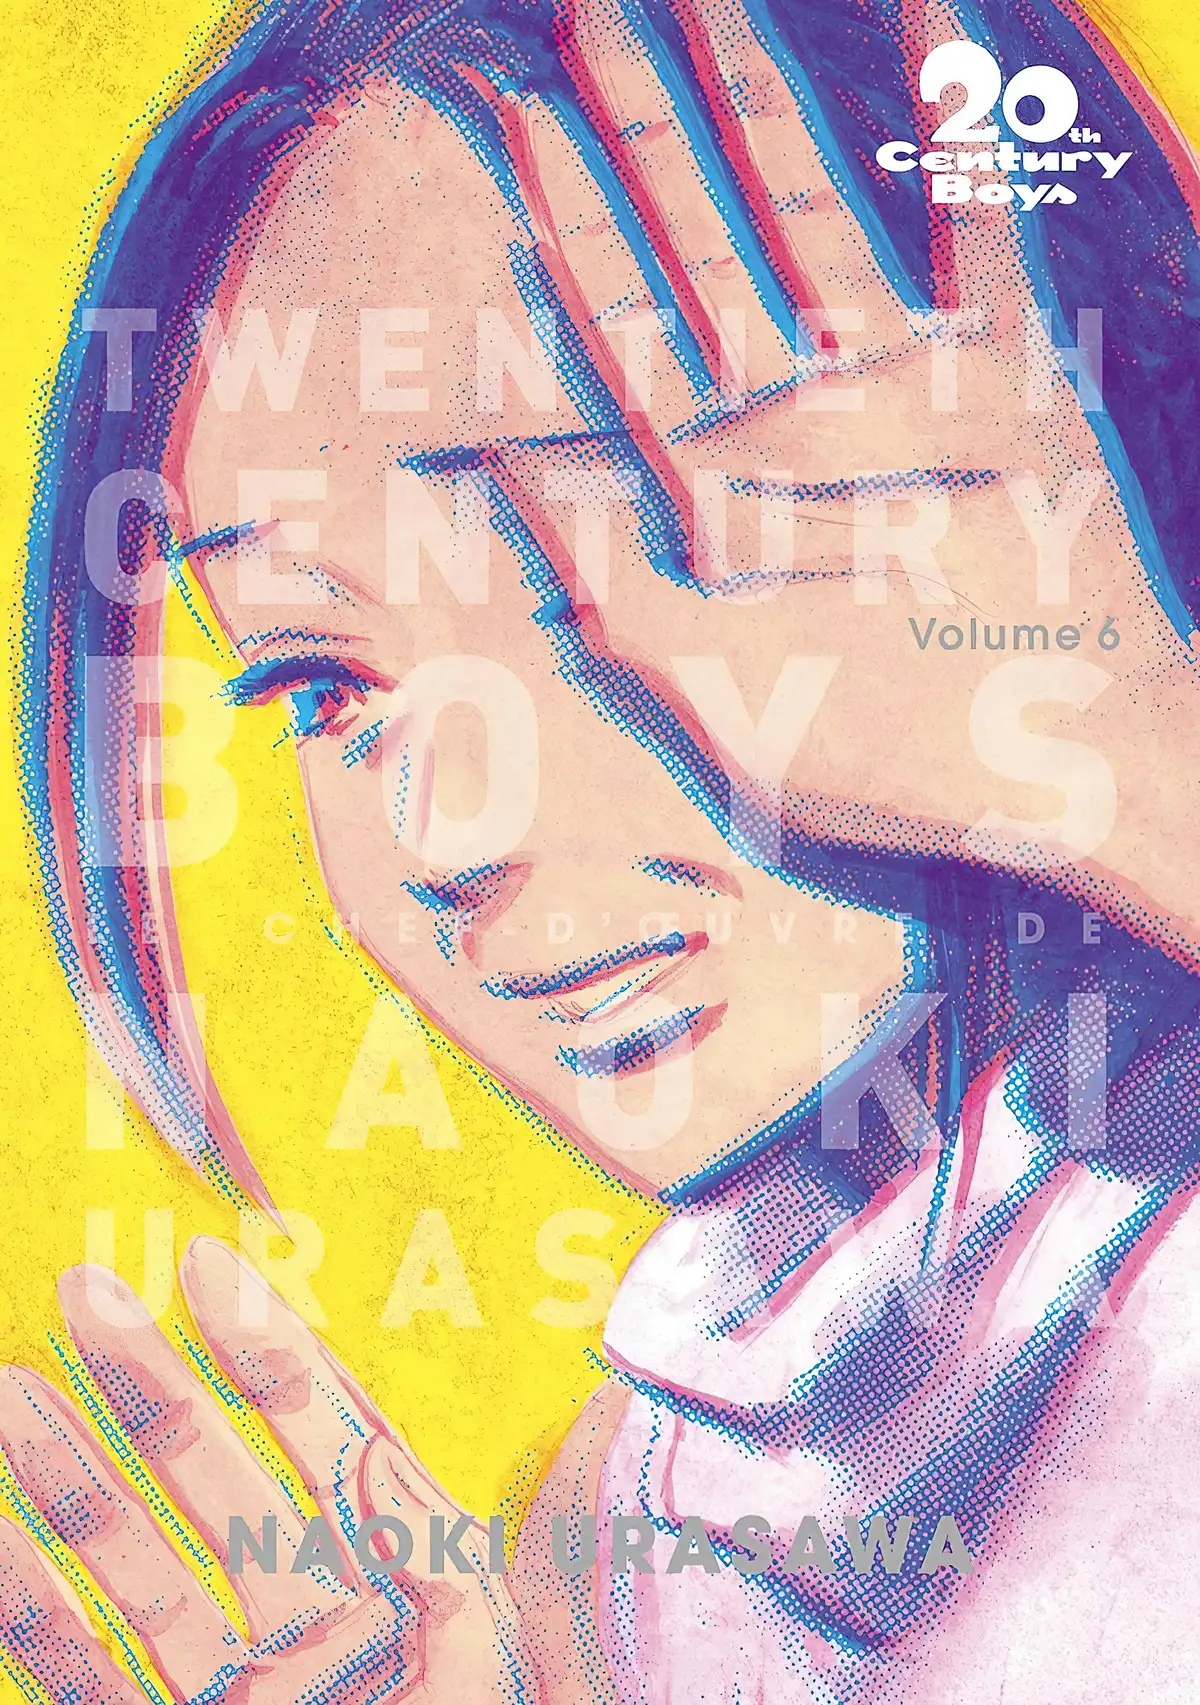 20th Century Boys – Perfect Edition Volume 6 page 1